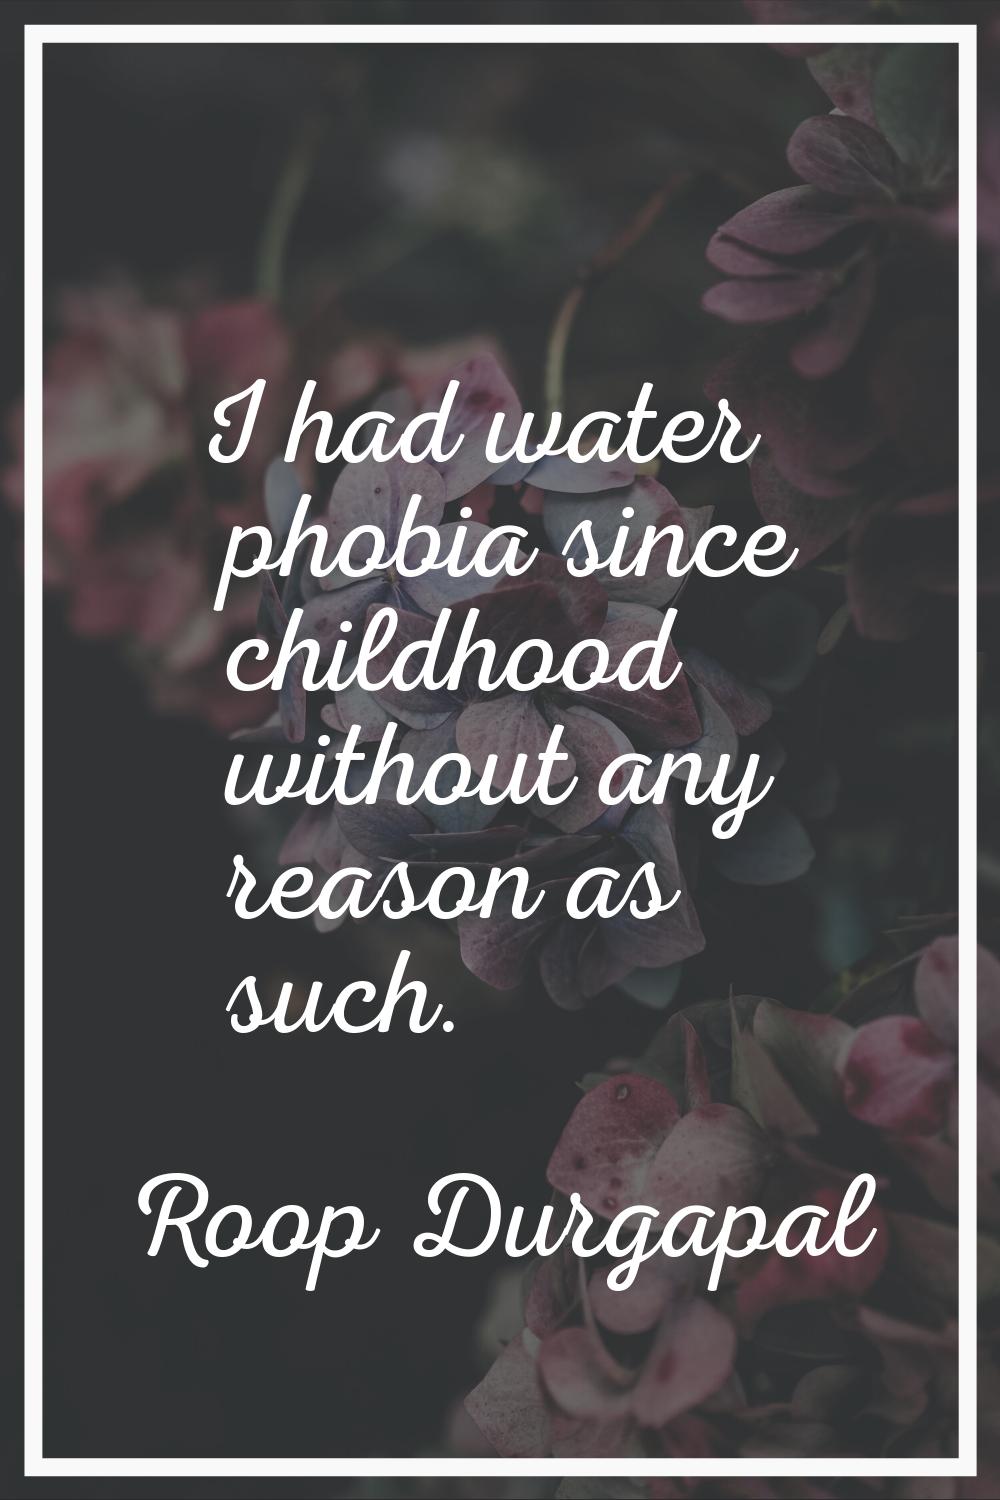 I had water phobia since childhood without any reason as such.